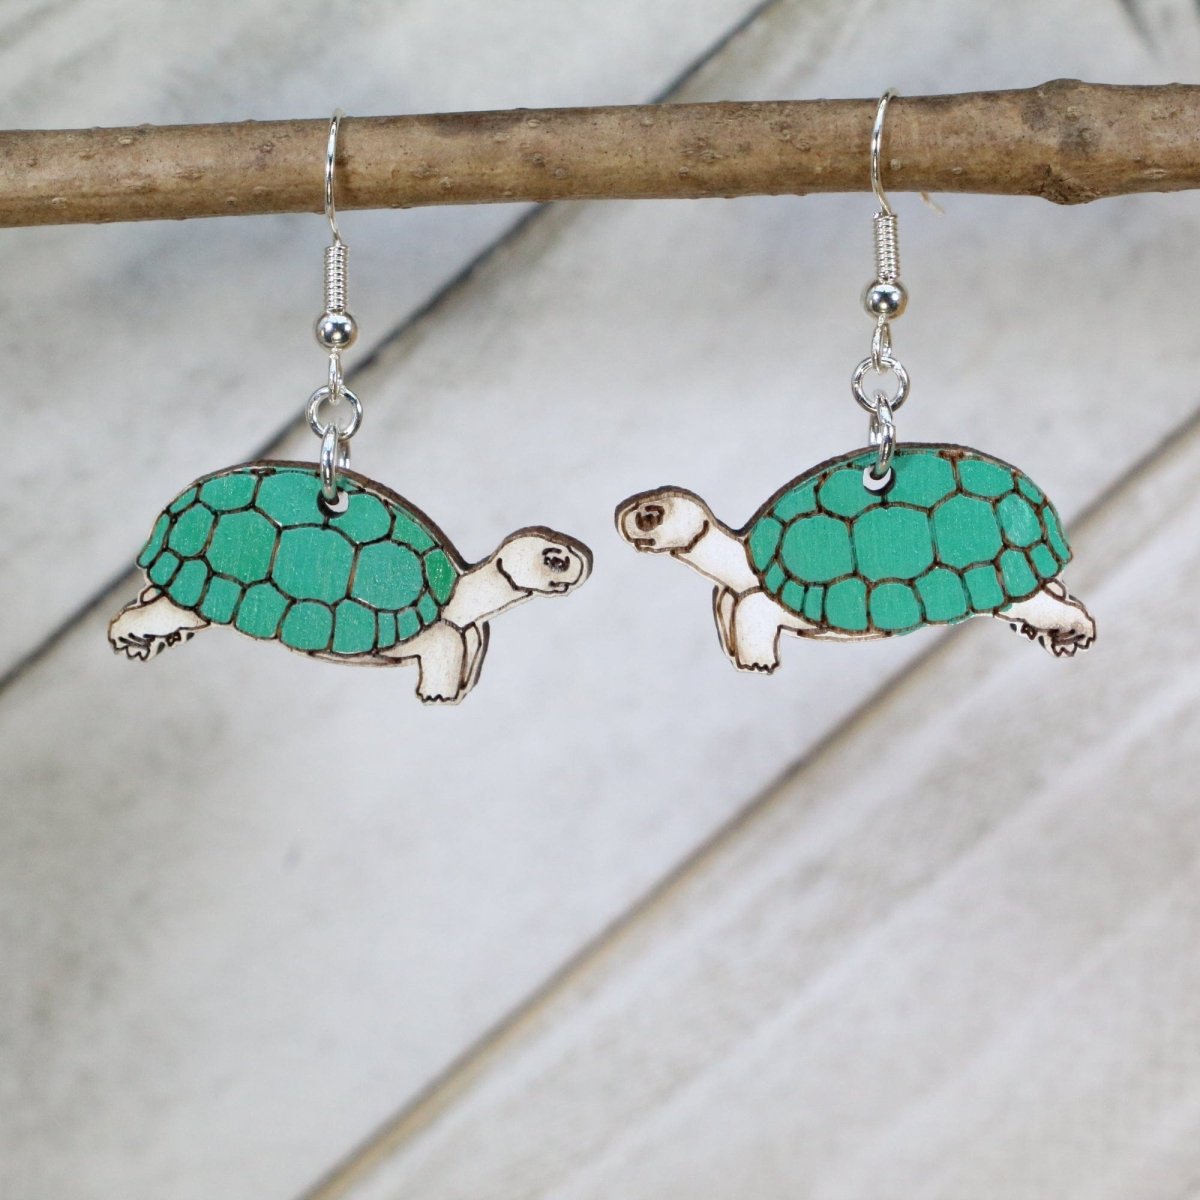 Realistic Turtle or Tortious Wooden Dangle Earrings - Green and White - Cate's Concepts, LLC